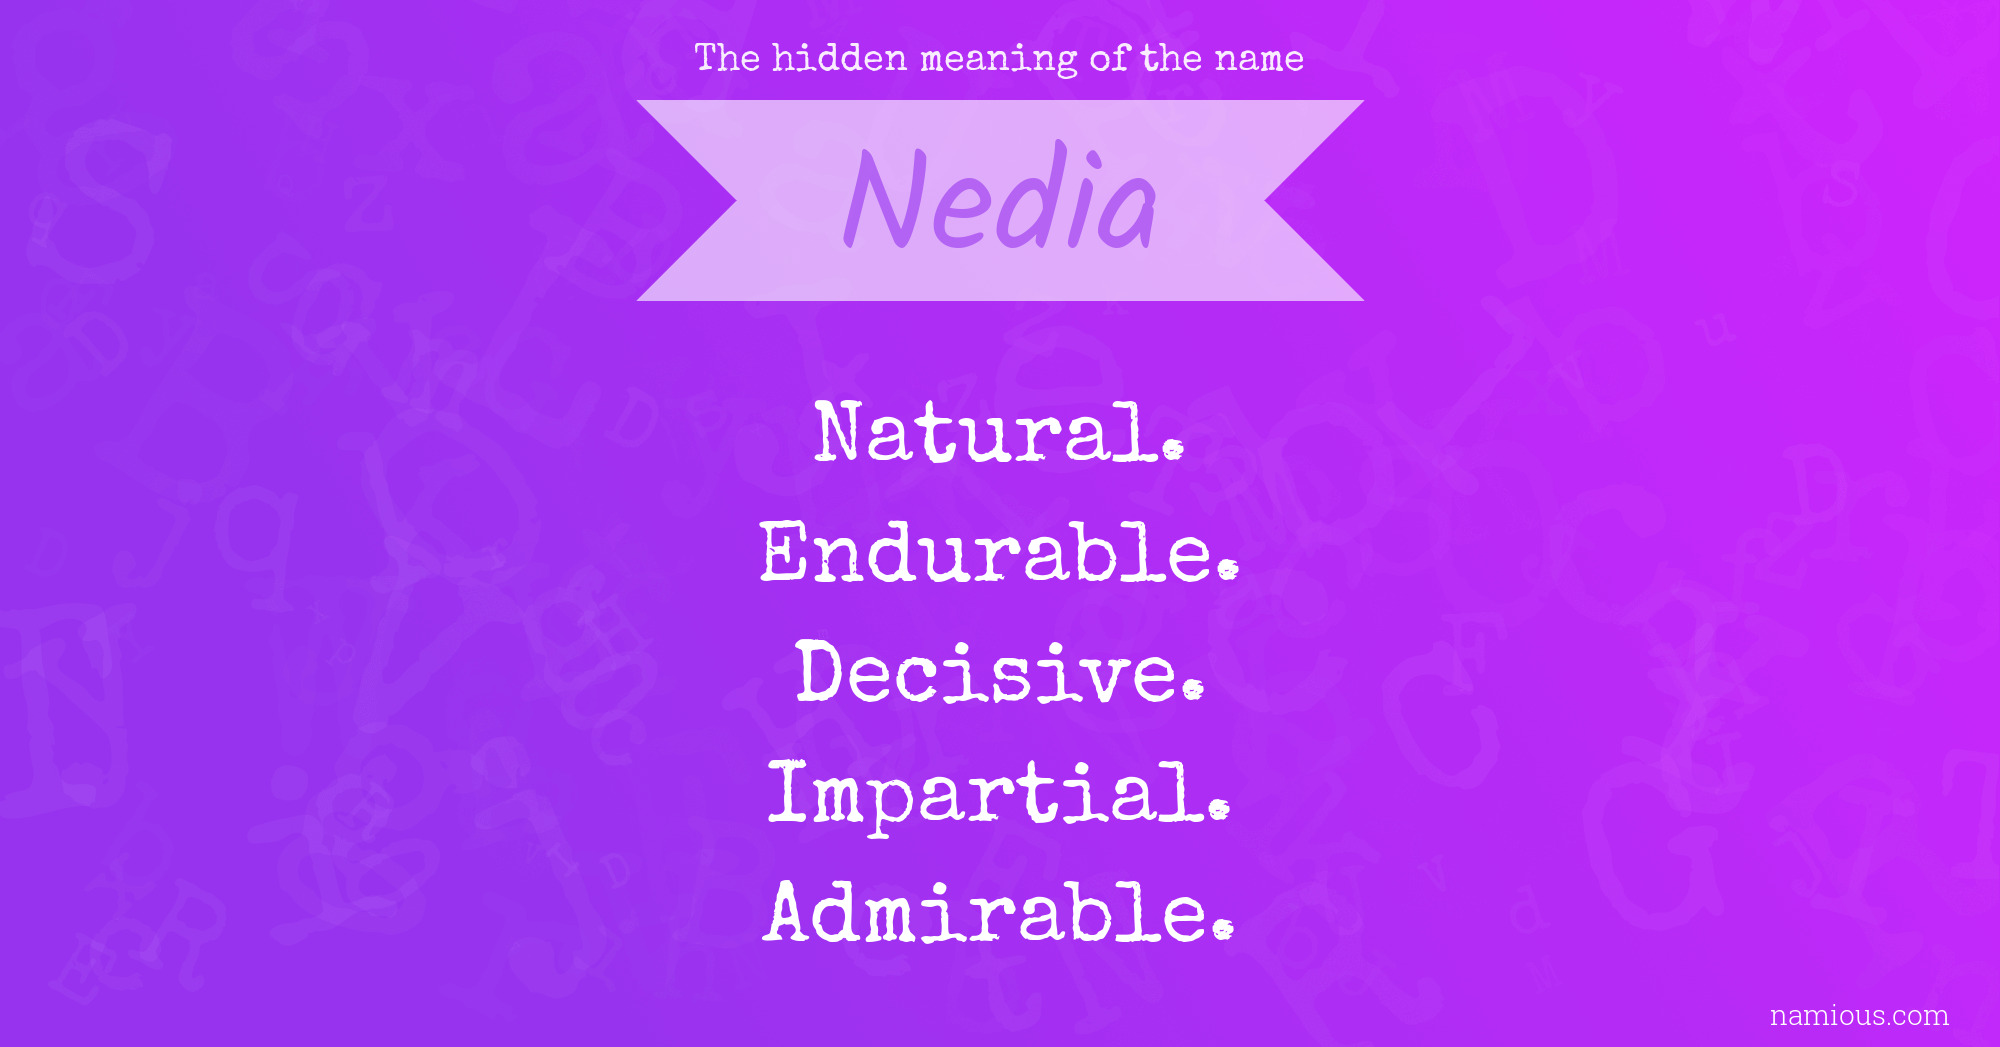 The hidden meaning of the name Nedia